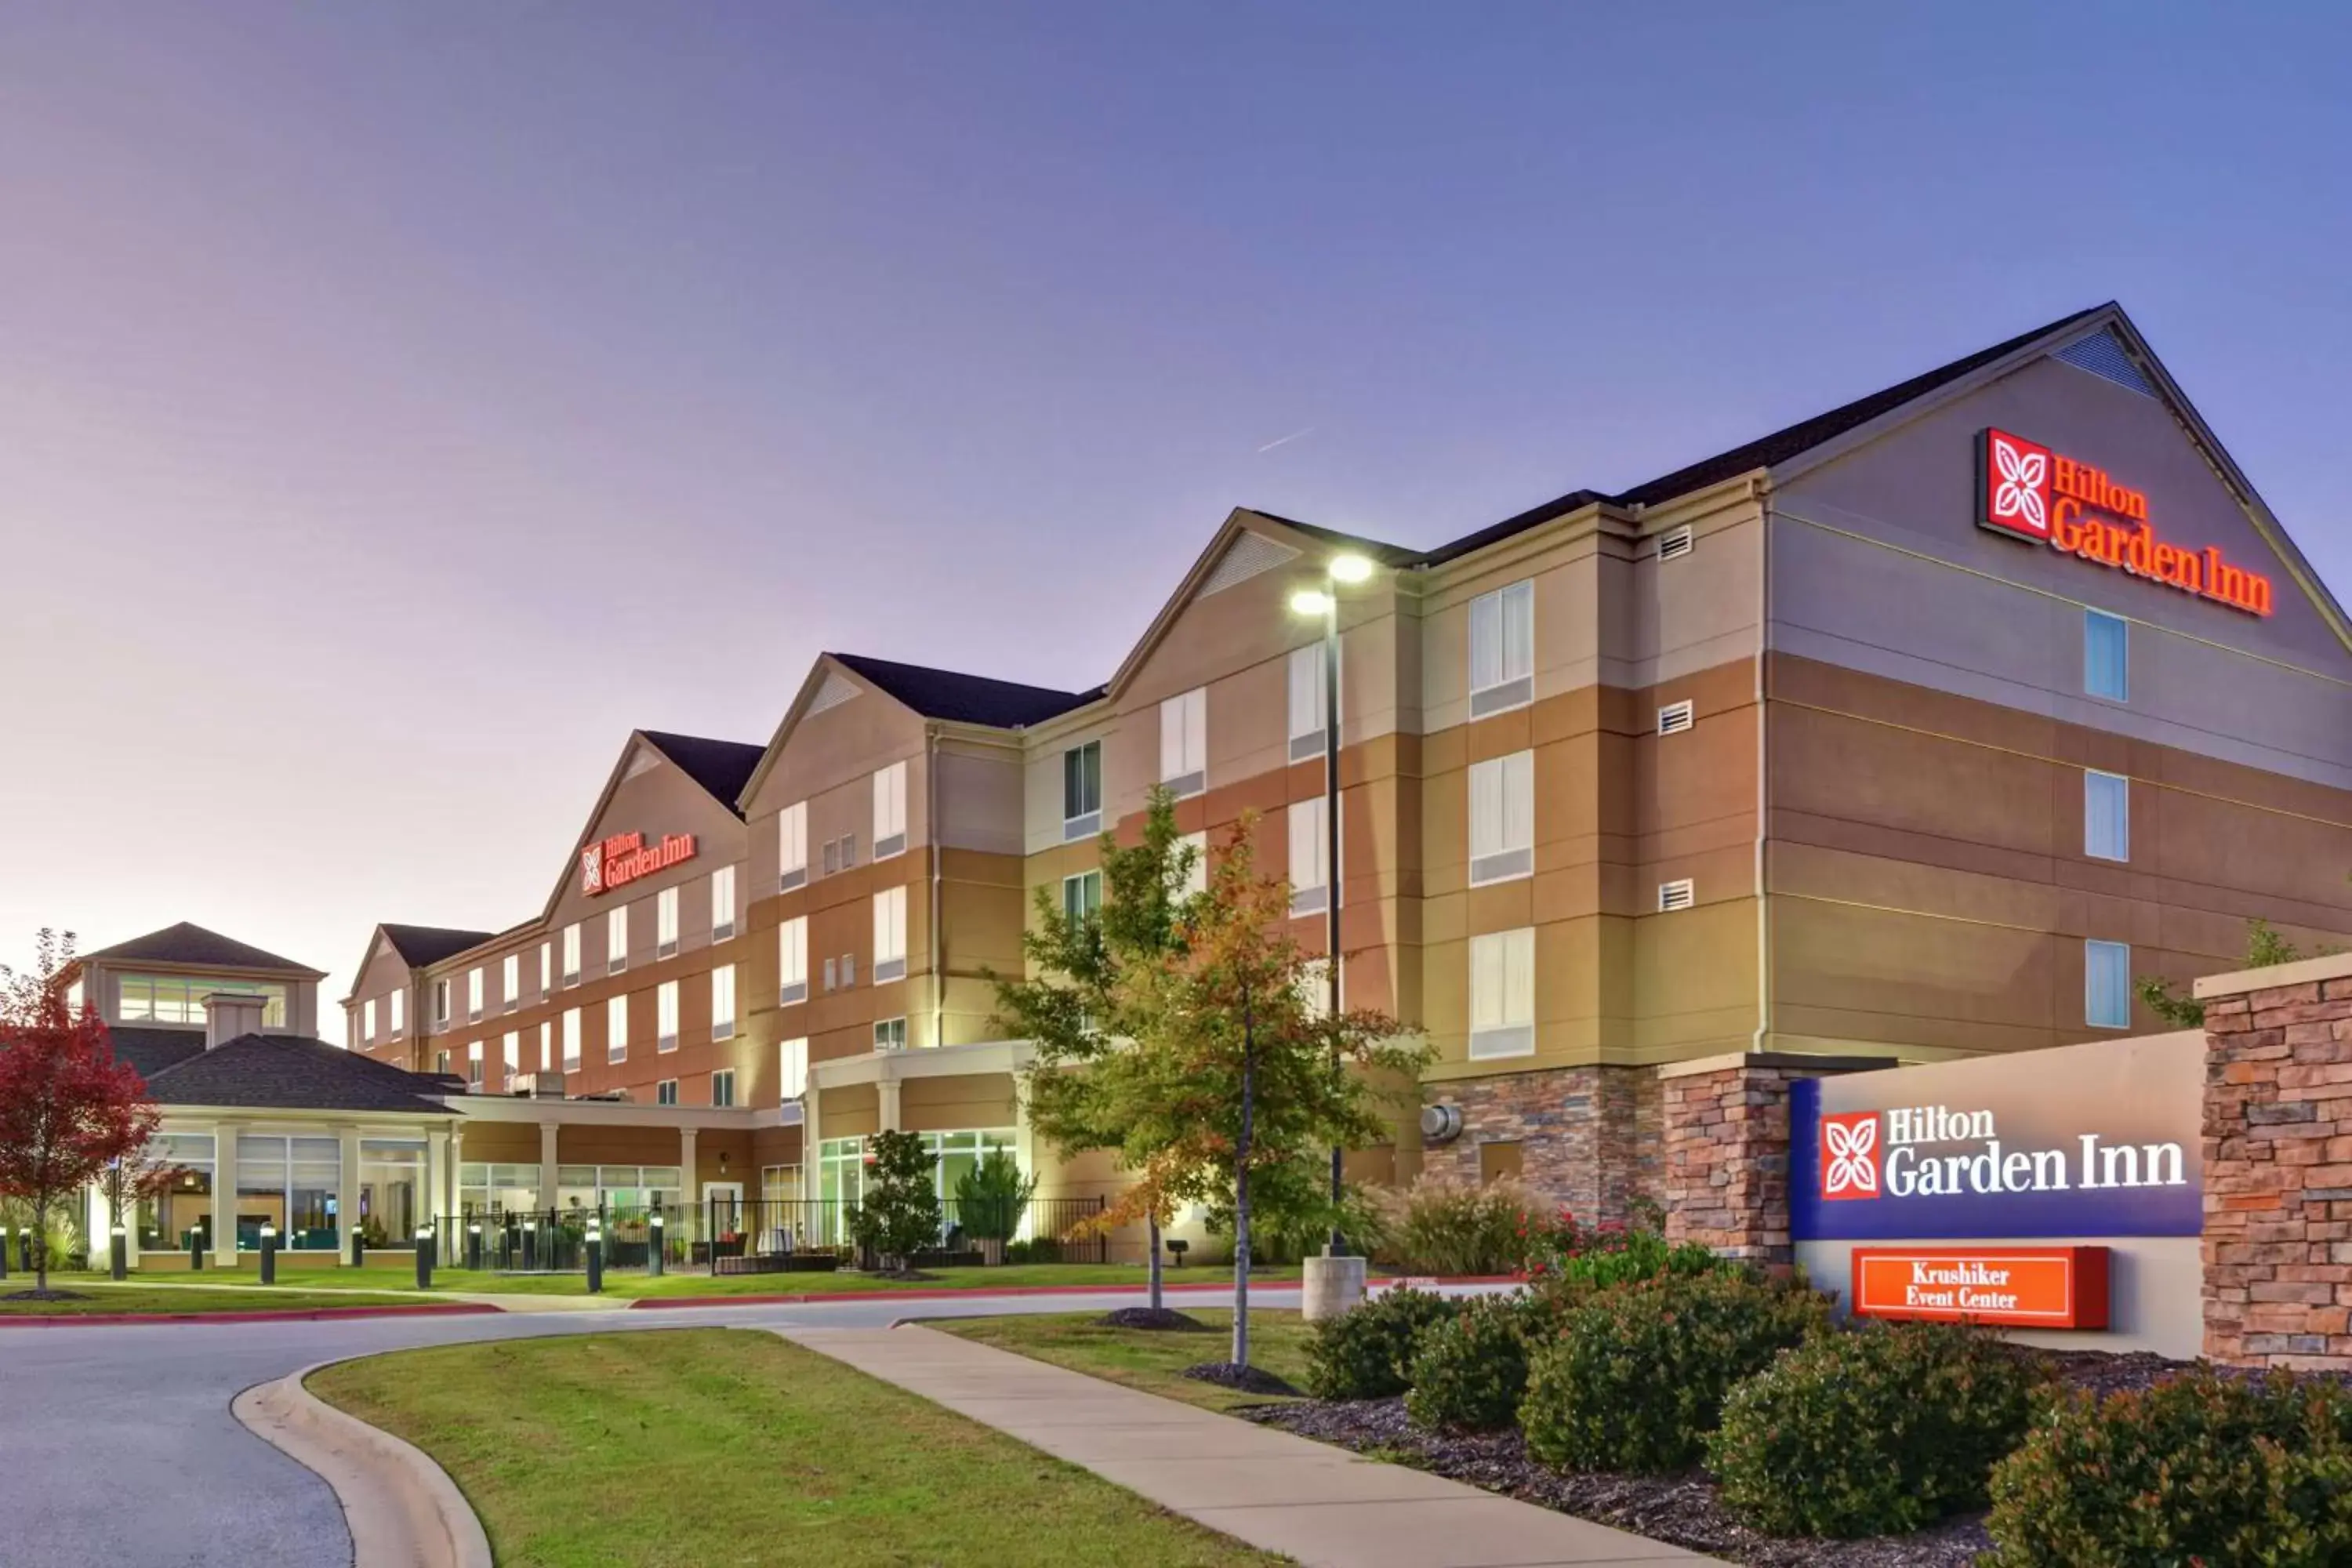 Property Building in Hilton Garden Inn and Fayetteville Convention Center